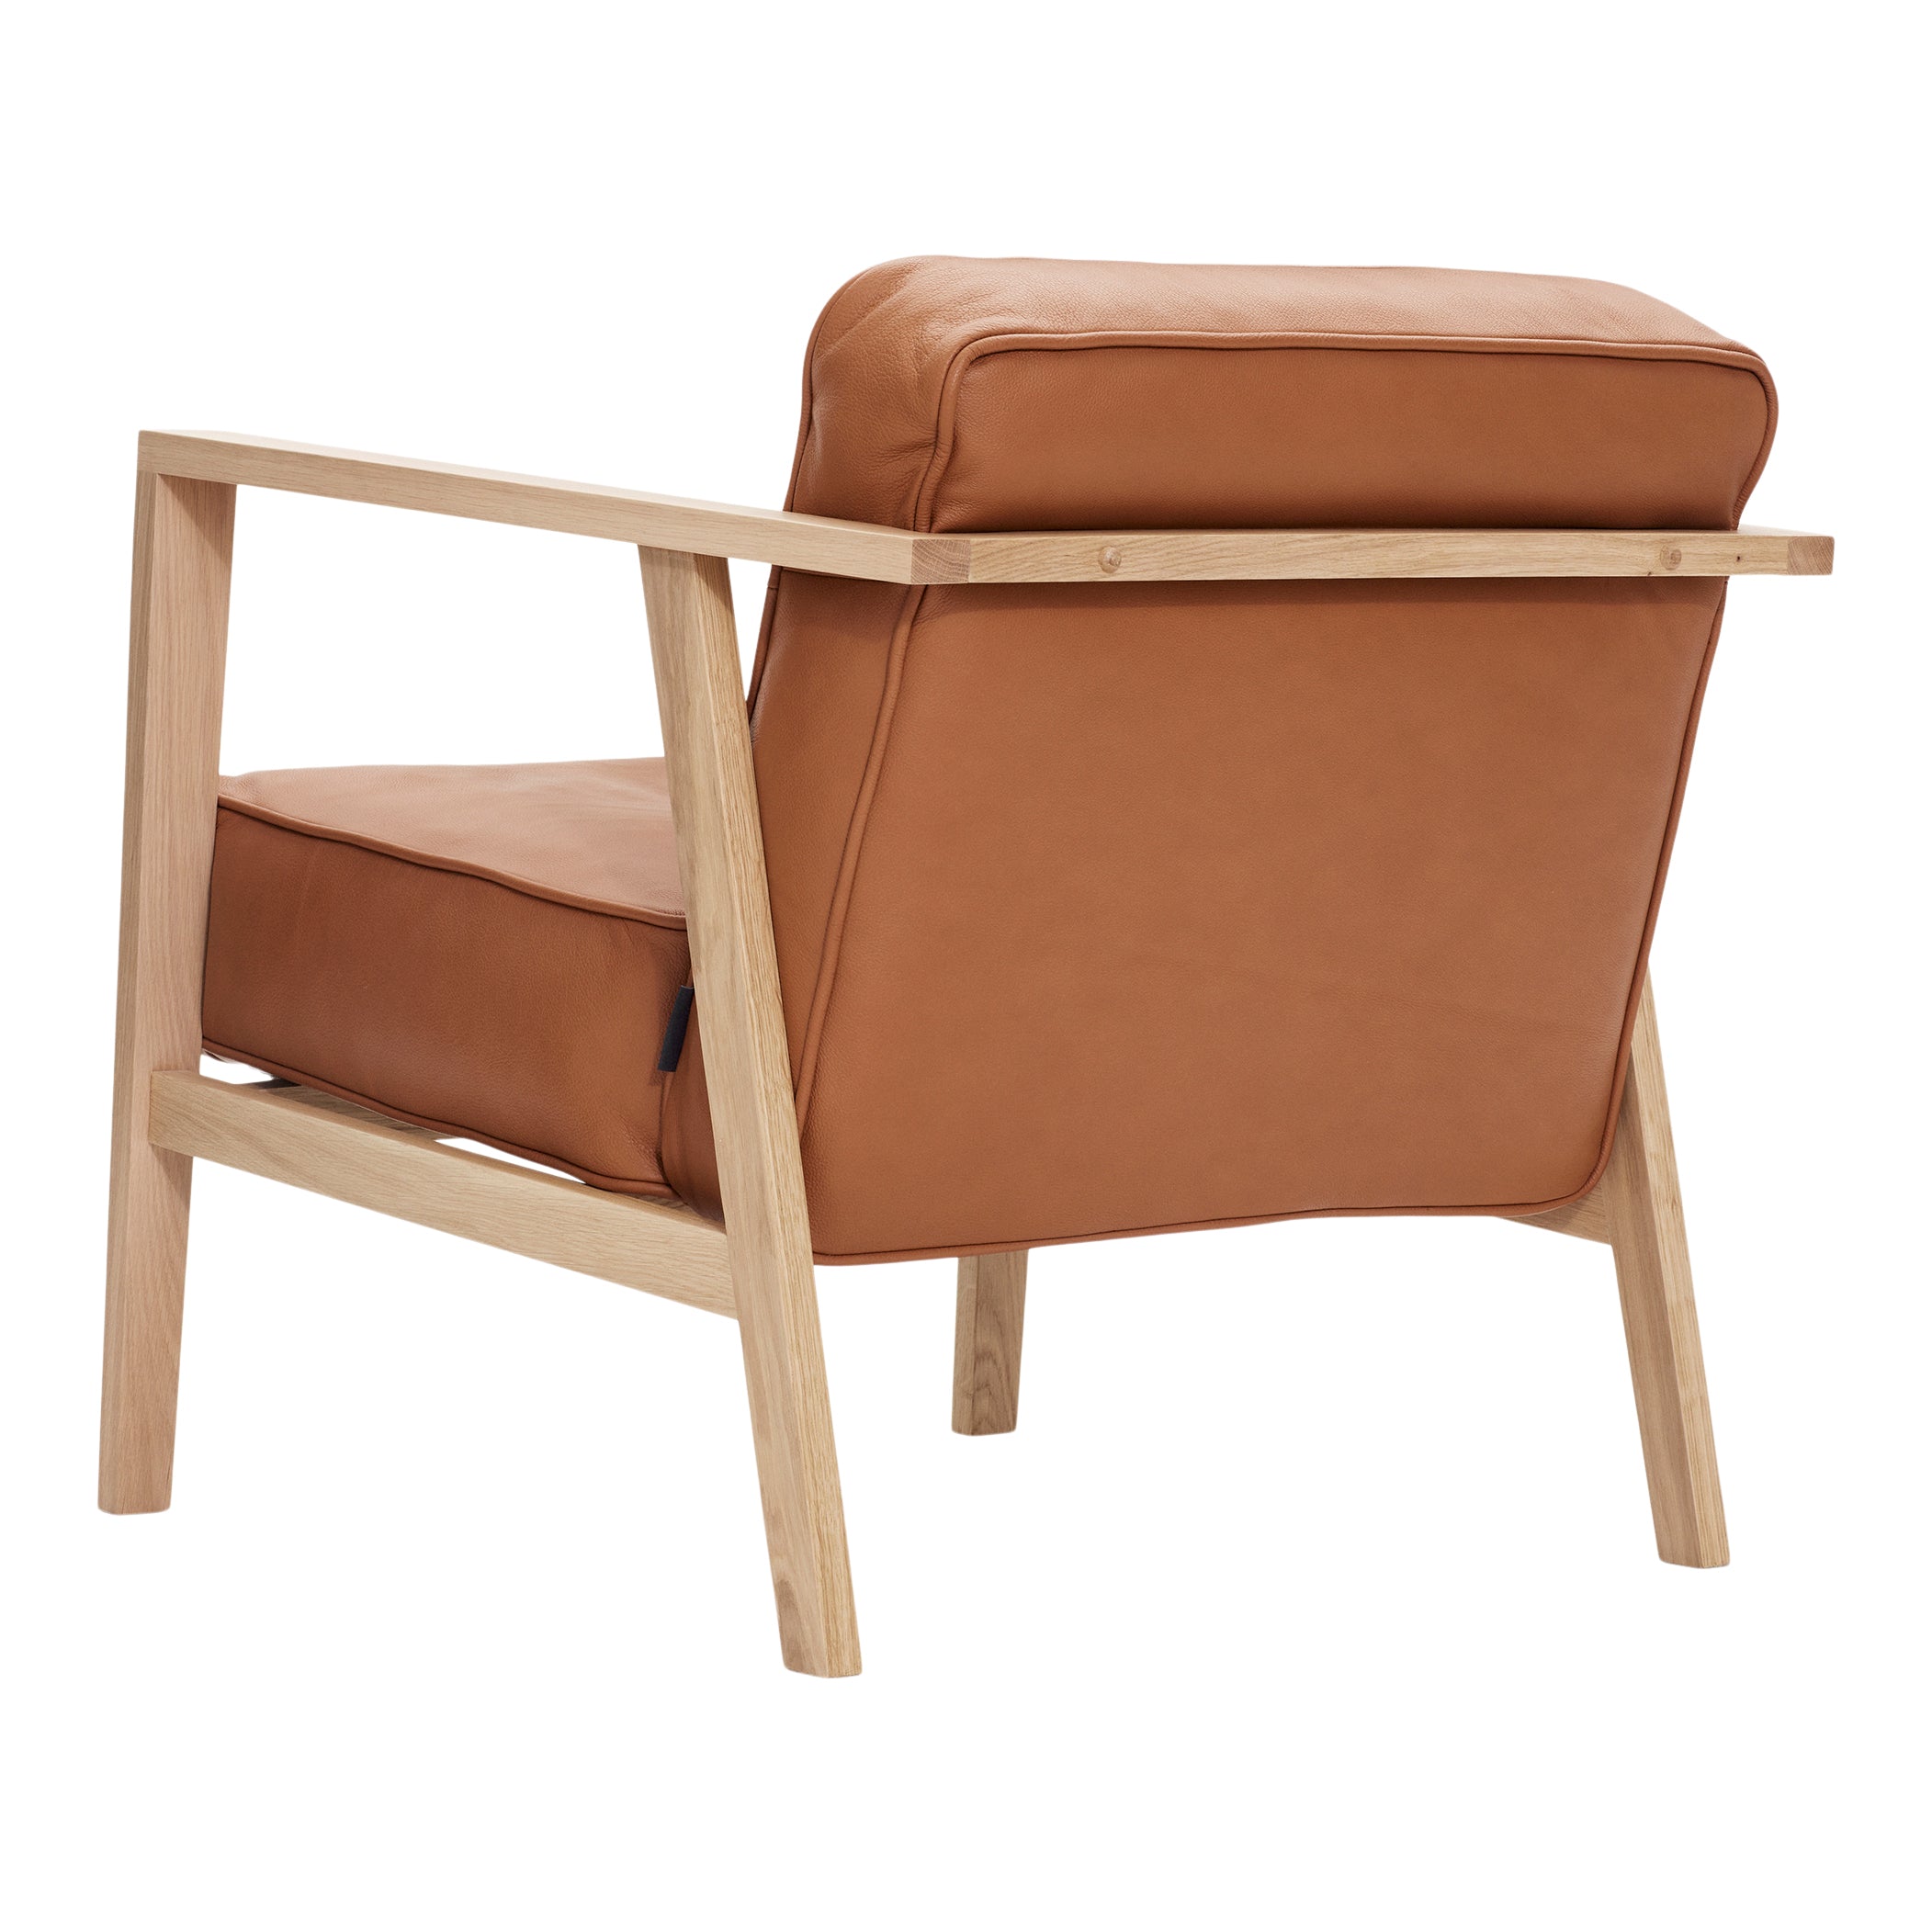 Andersen Furniture - LC1 Lounge chair - cognac leather/frame in oak